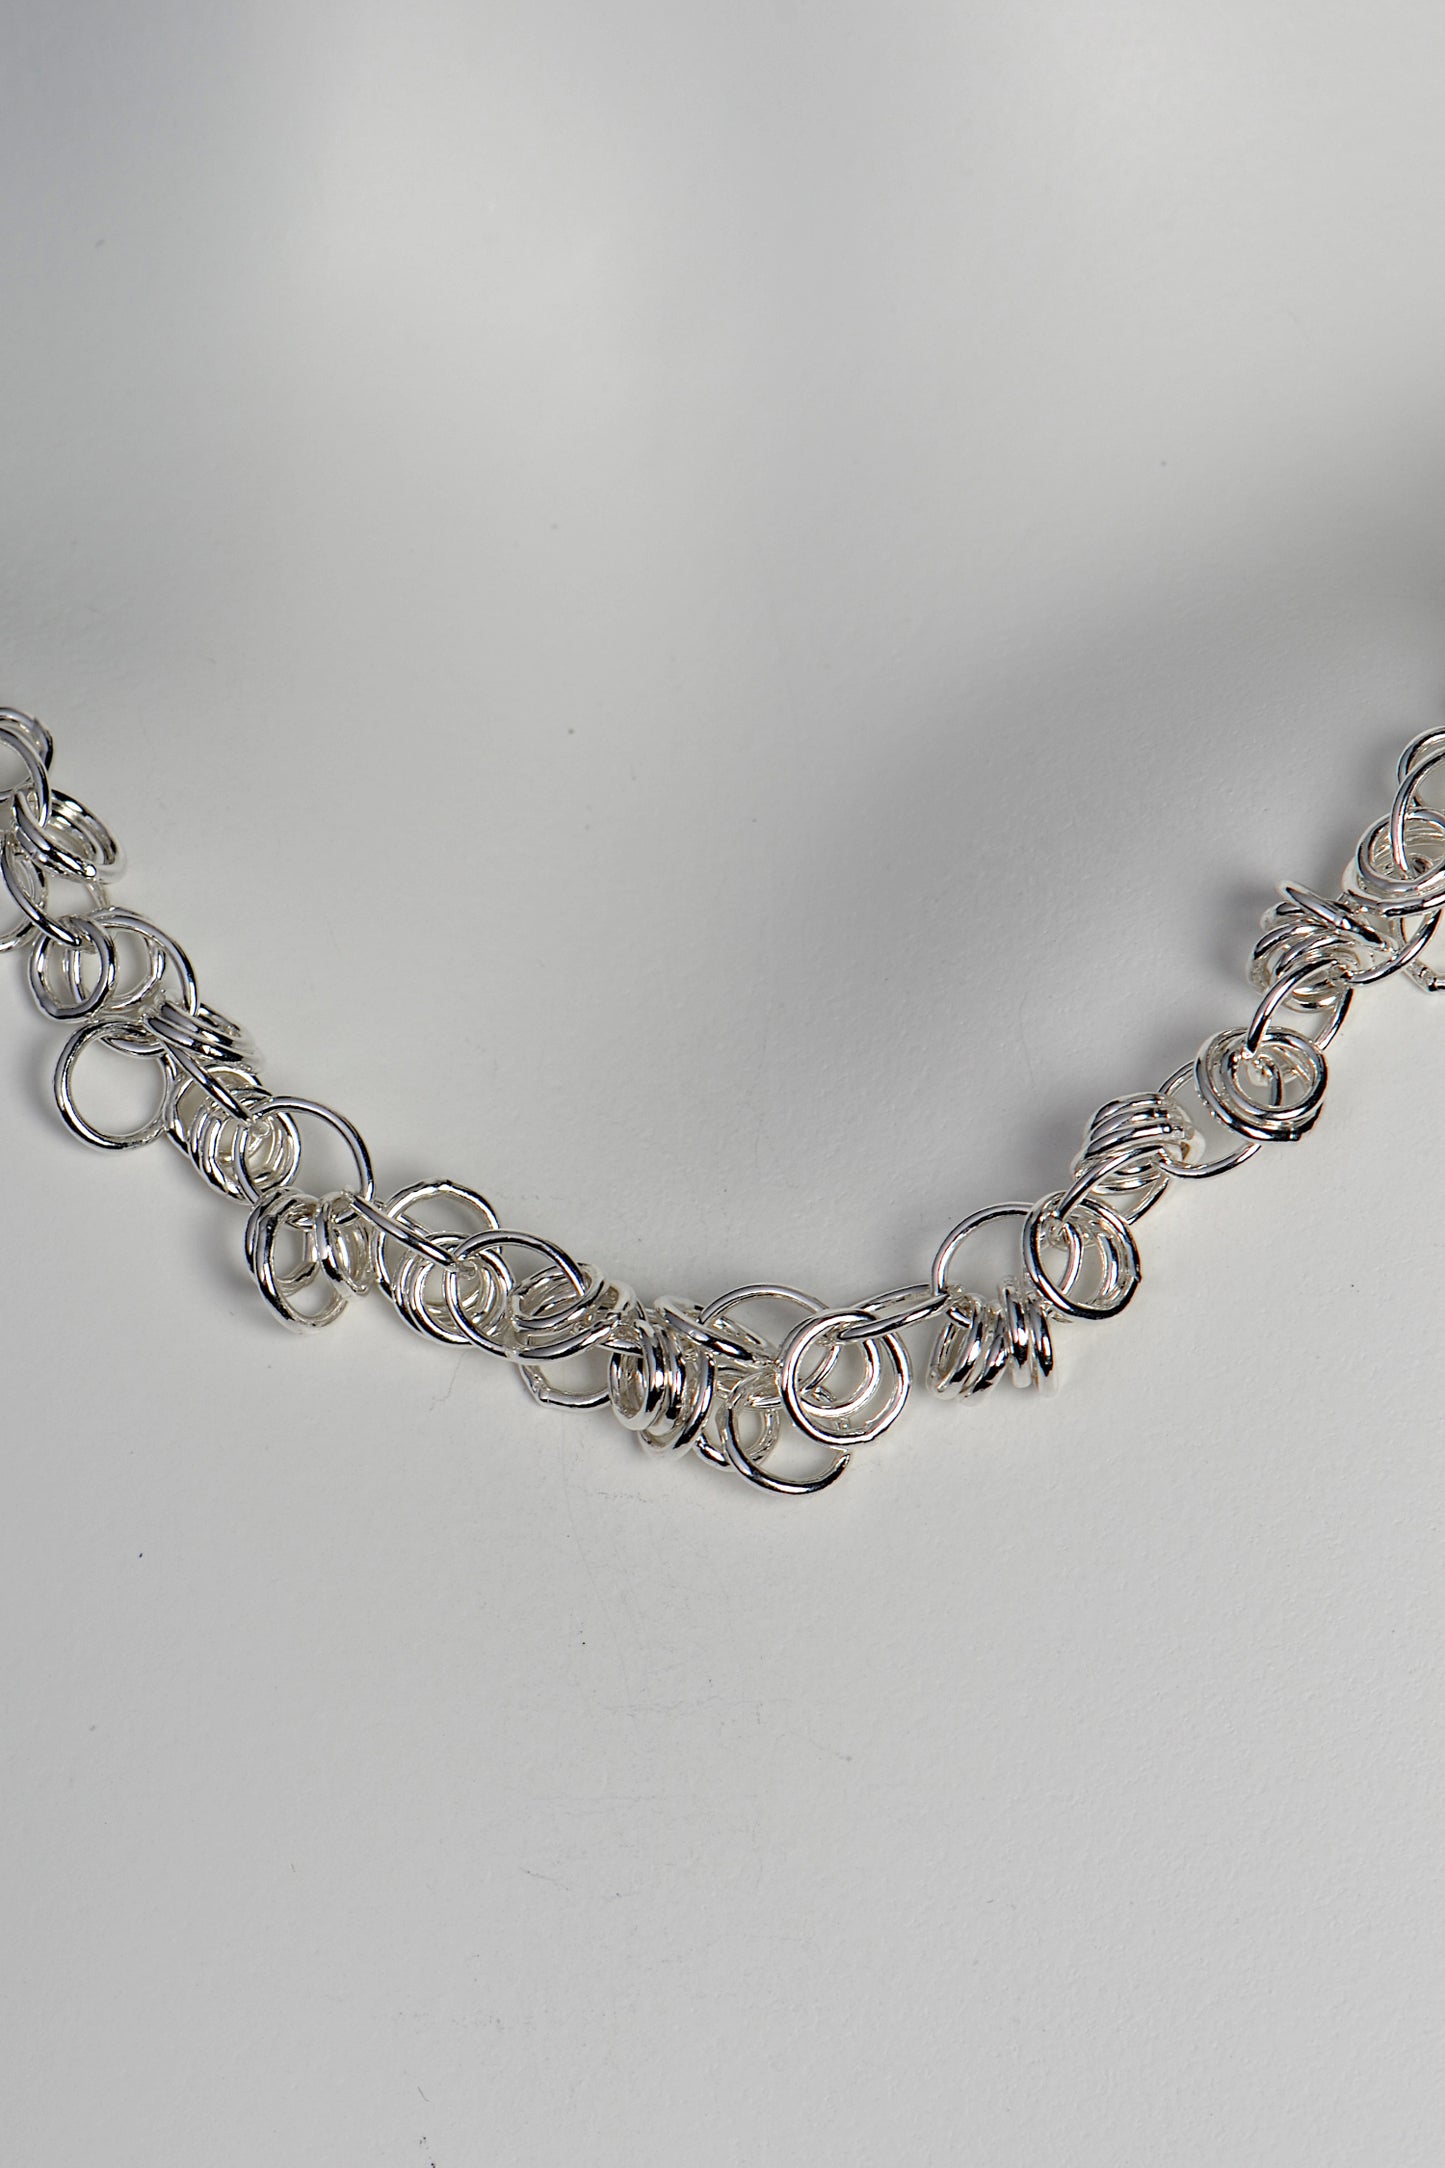 close up detail showing the round and oval links of the sterling silver chain necklace